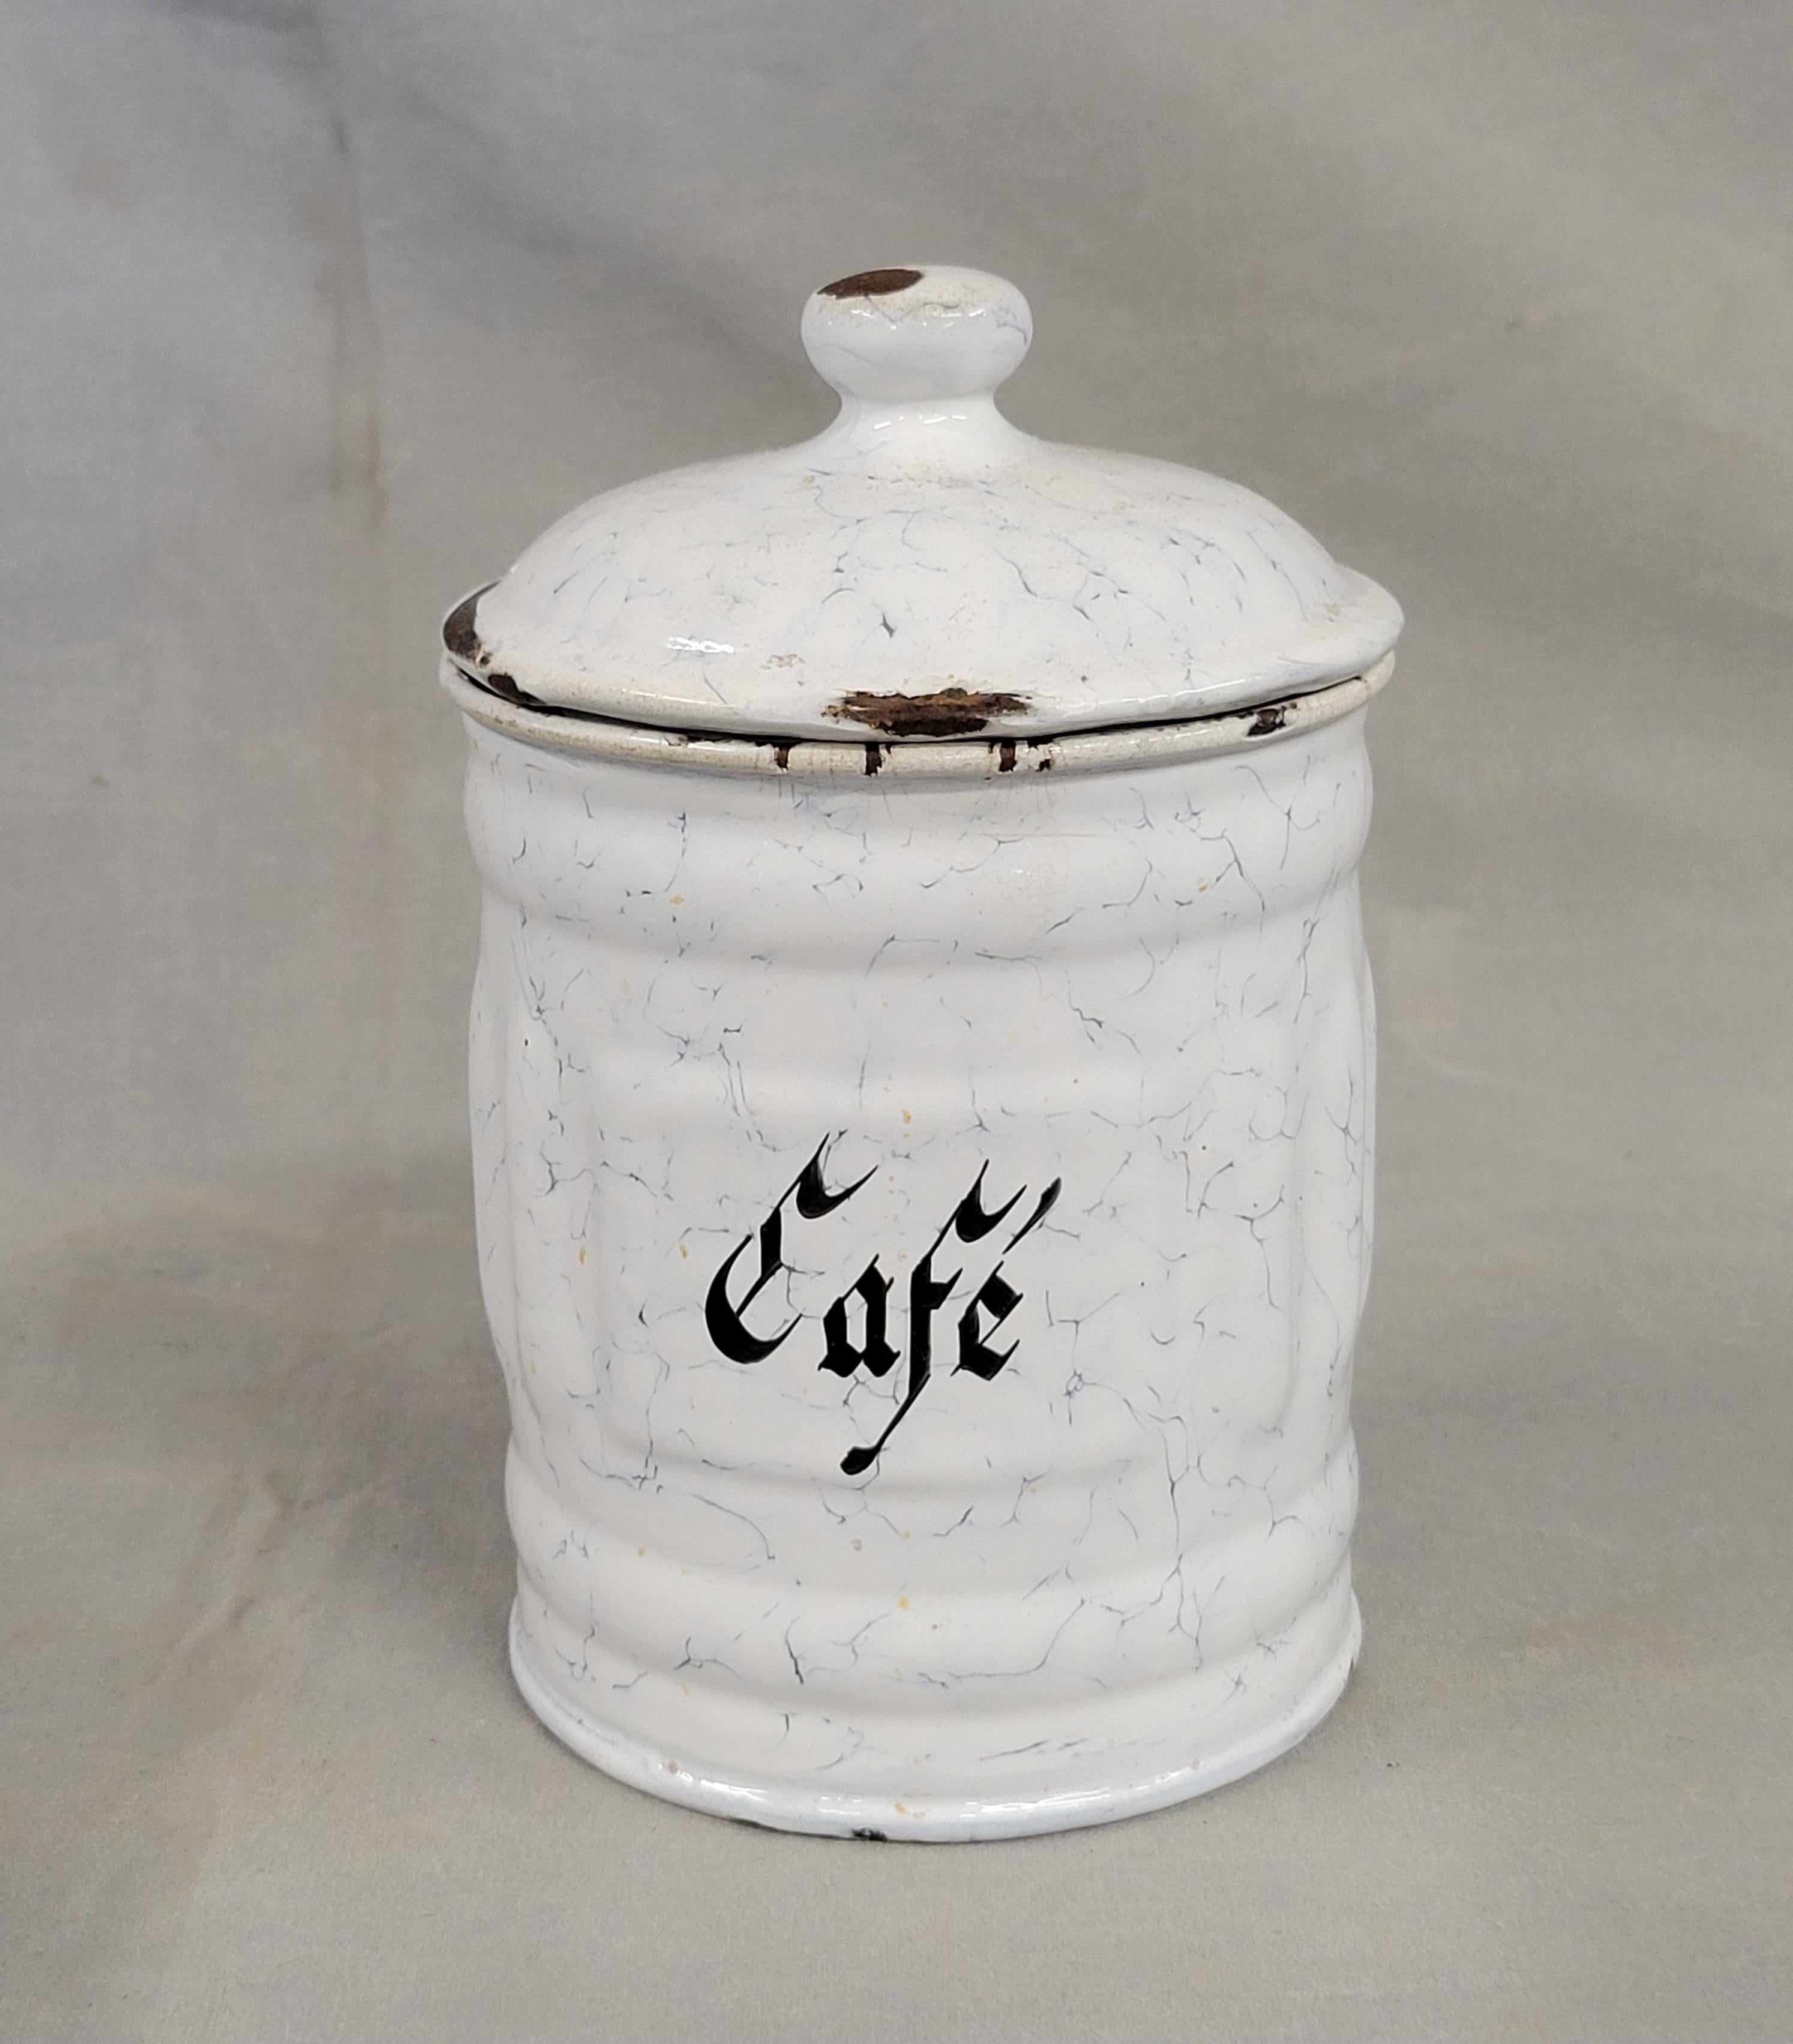 Antique French White and Blue Enamel Canister Set - 6 Pieces For Sale 1